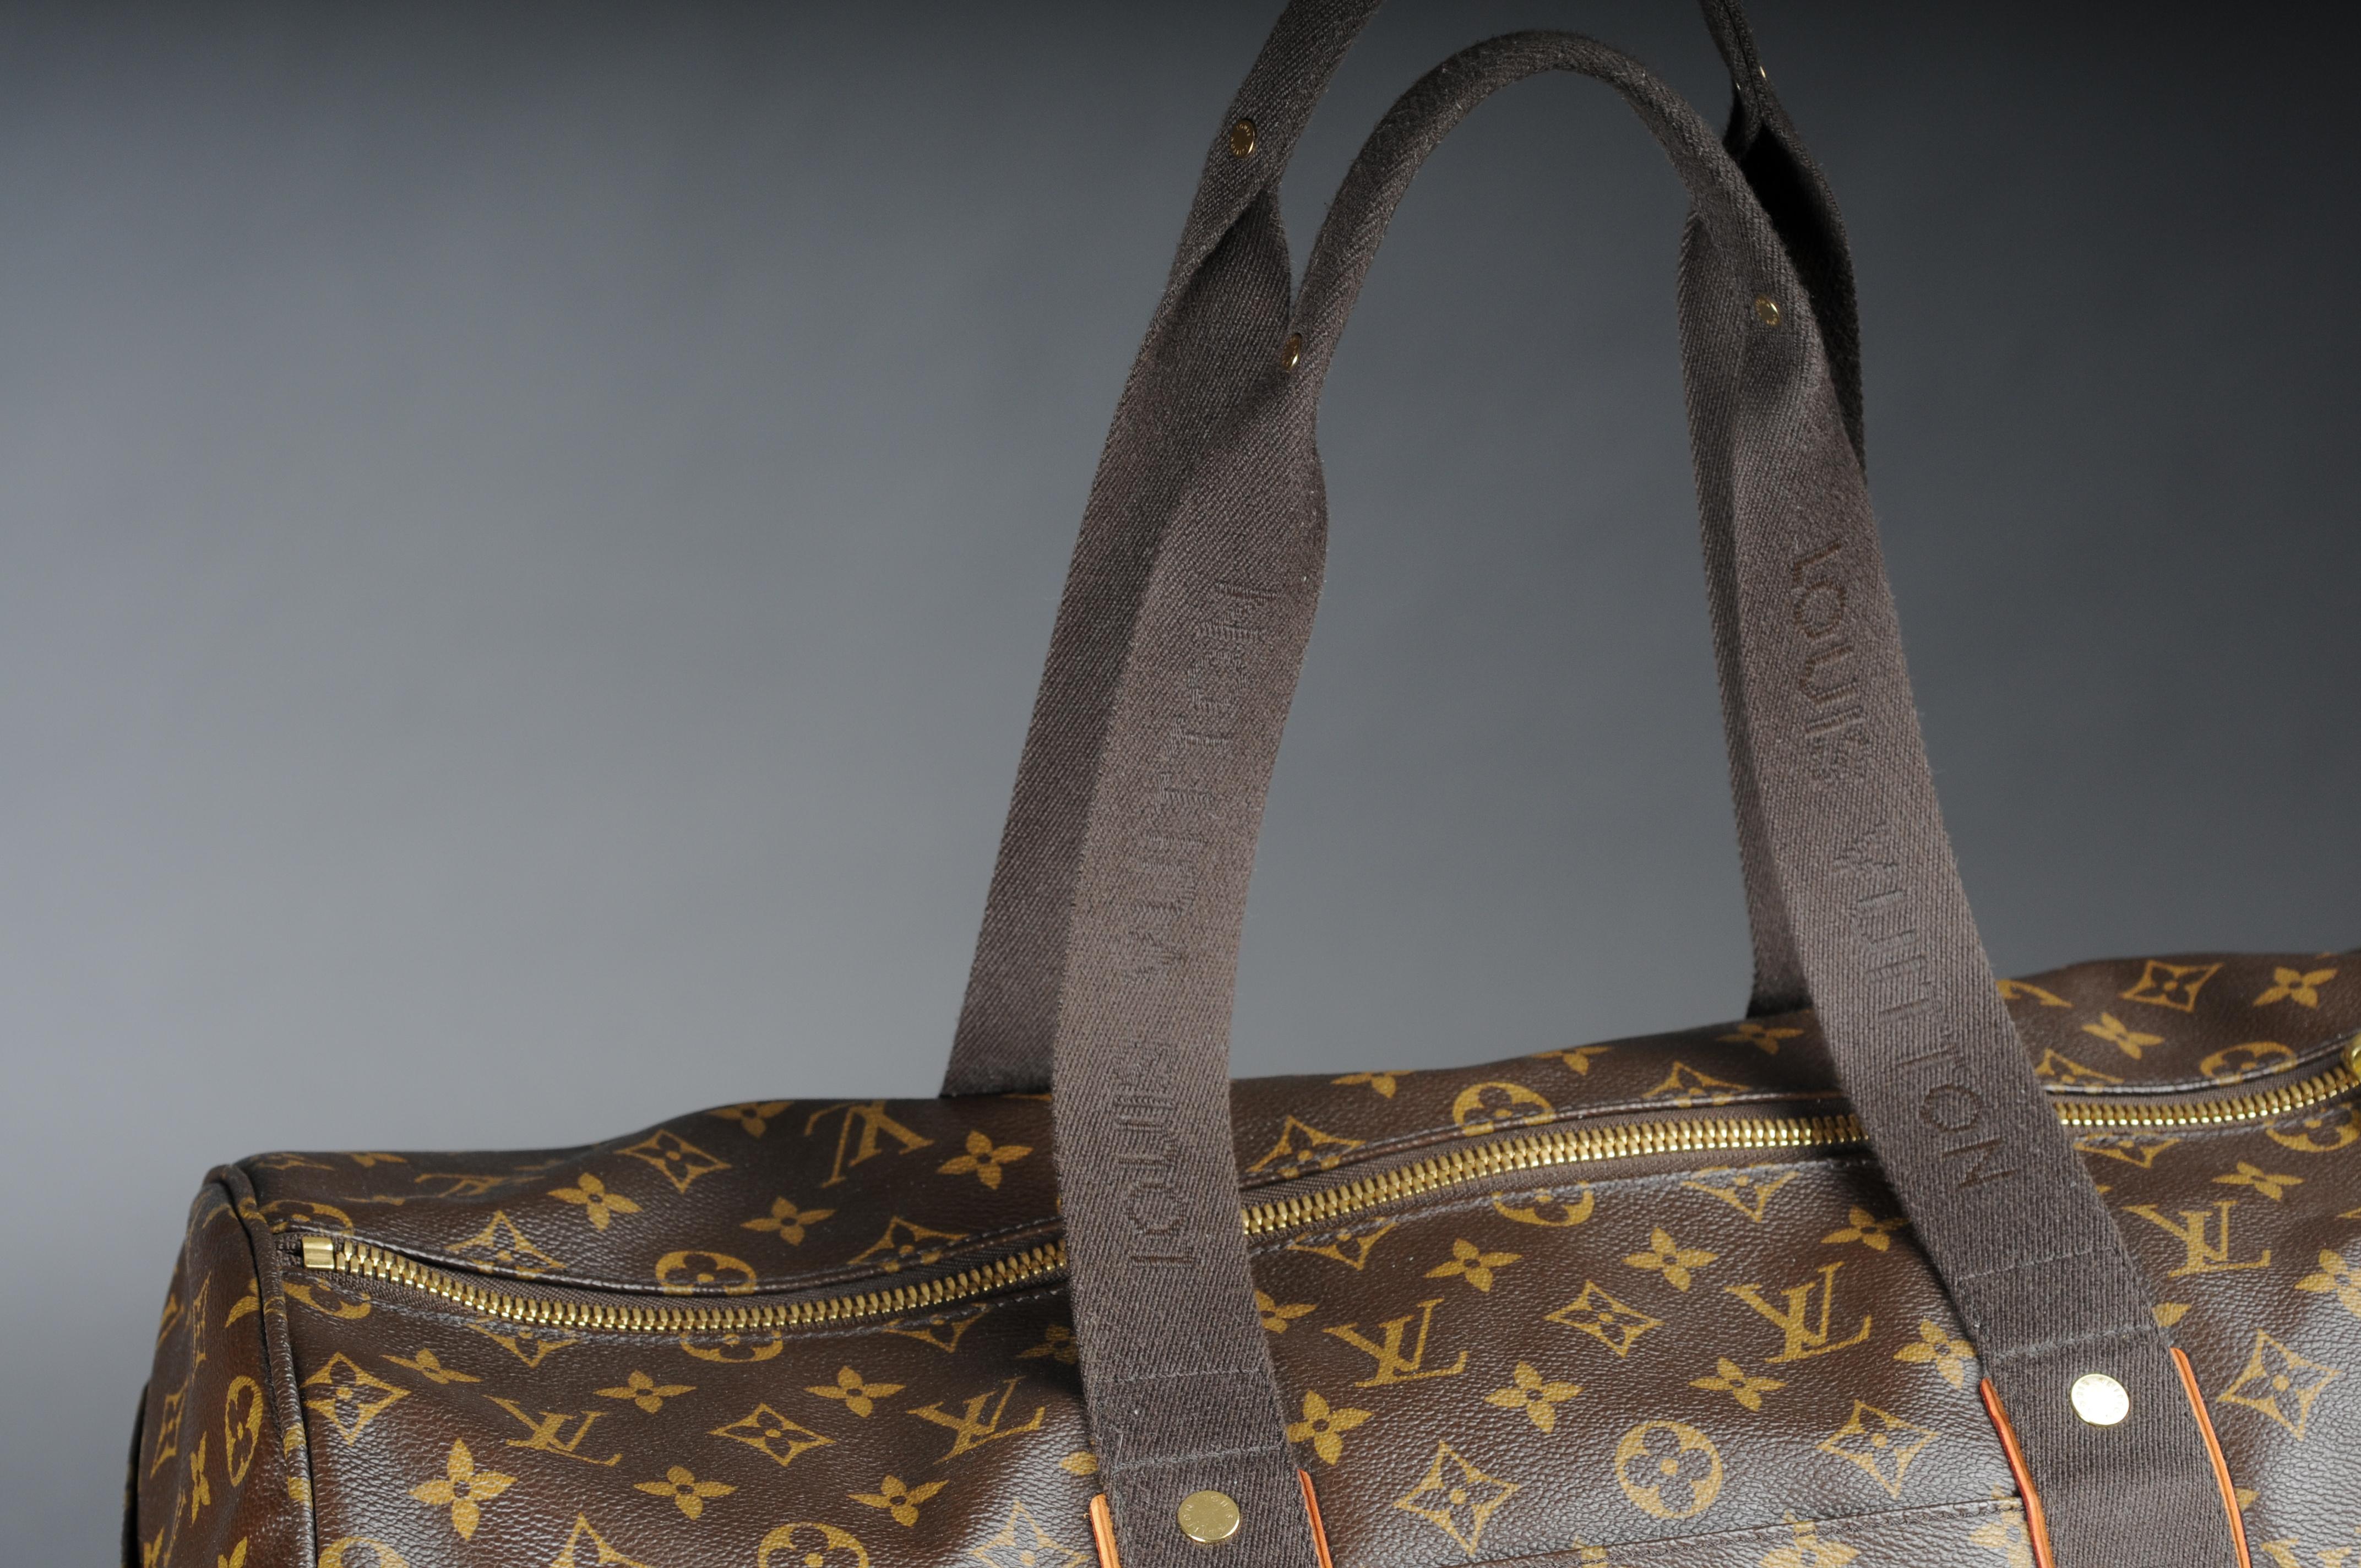 circa 2009
Maroon
iconic Monogram canvas
cylindrical design
two long handles
Two-way zipper
gold-colored fittings
major subject
several pockets inside
Condition: good. This item is in good condition, with minimal signs of wear, e.g. B. on material